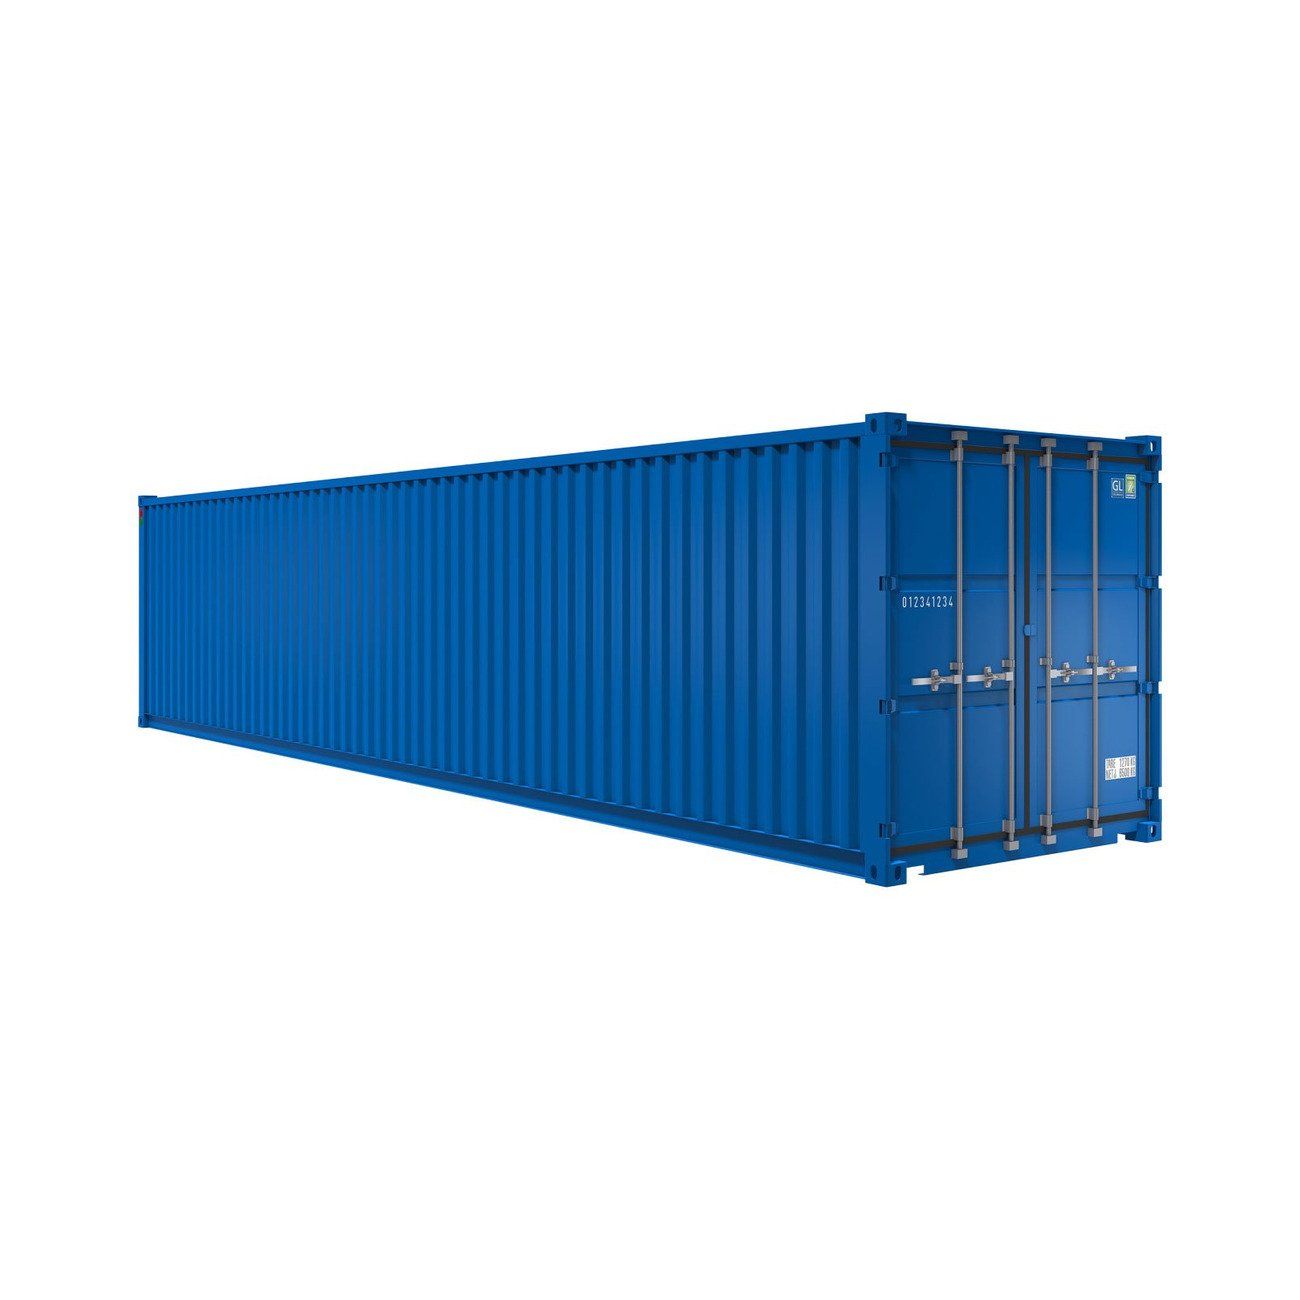 40’ DV CONTAINEX shippingcontainer